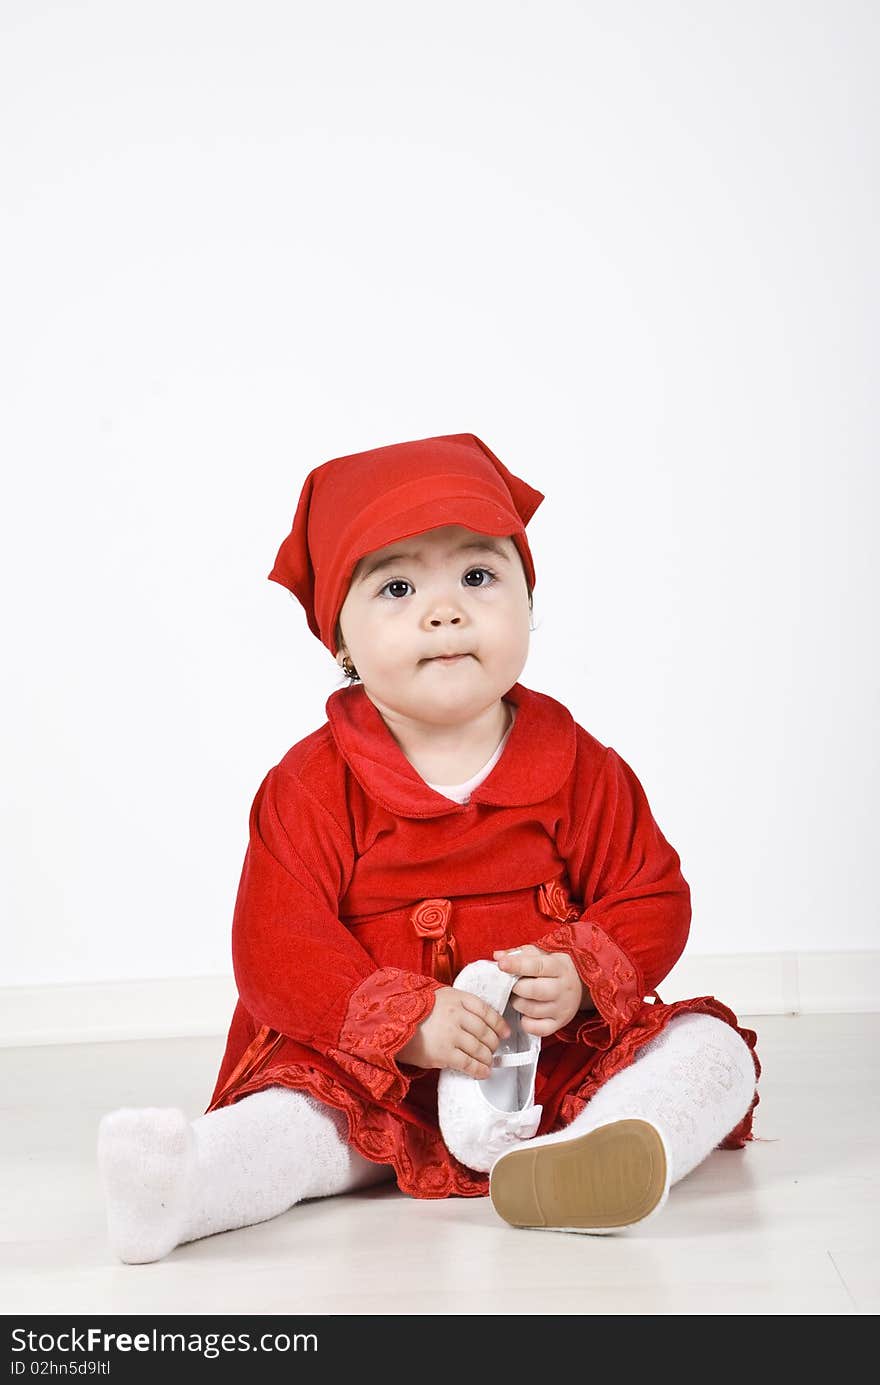 Little girl 11 months old sitting on floor dressed in little red riding hood costume and holding a shoe in her hands.Check also Children